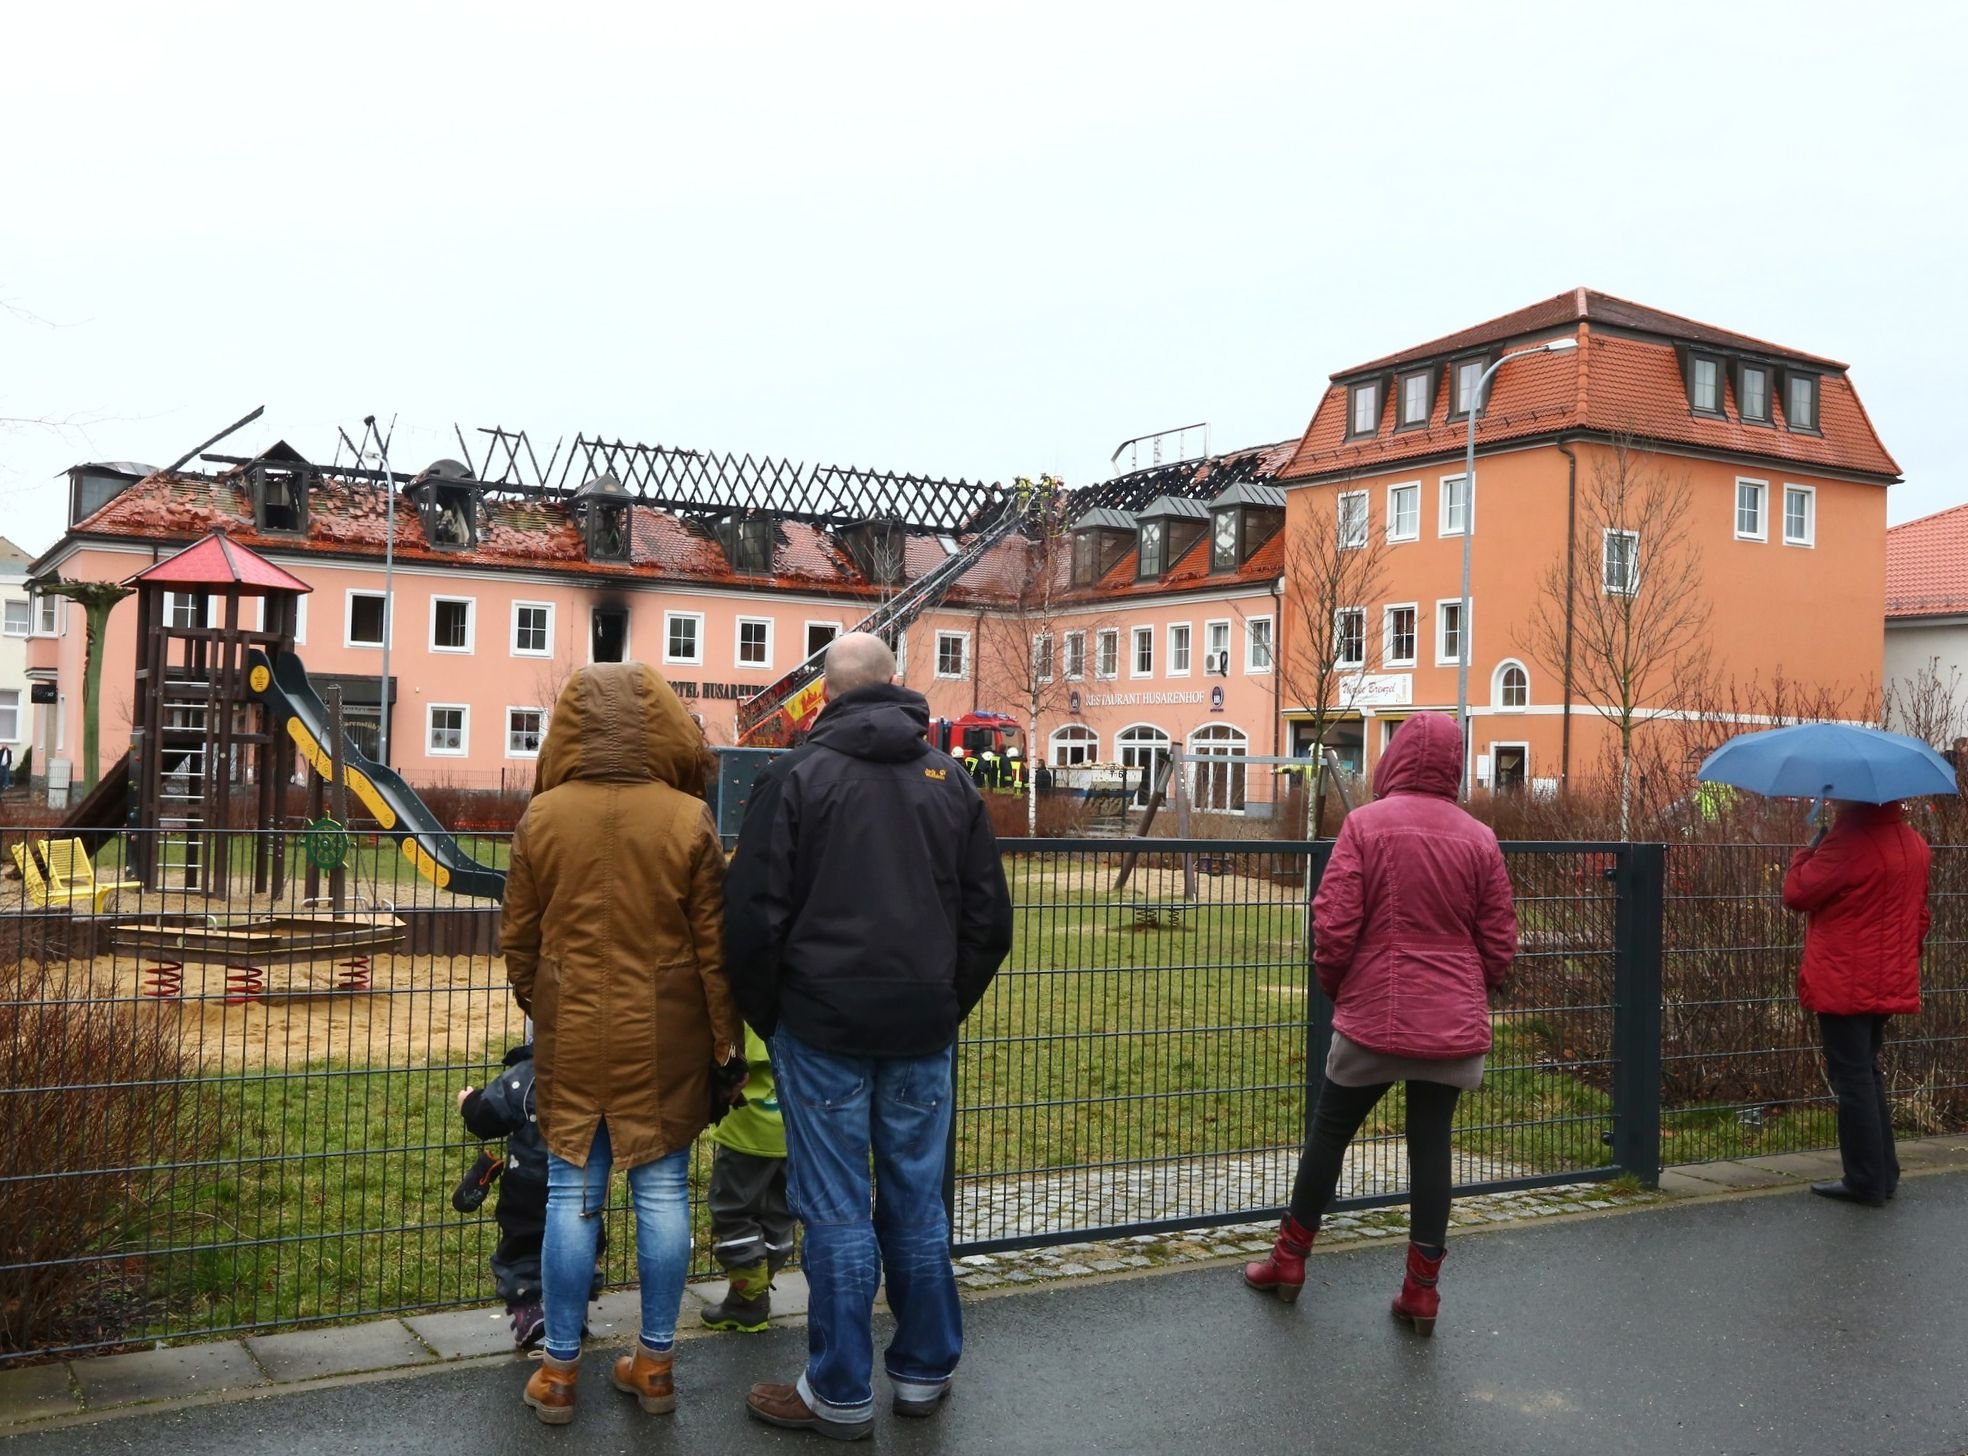 People look at the burnt-out roof of a former hotel that was under reconstruction to become a shelter for migrants in Bautzen, Germany, Feb. 21, 2016. (Christian Essler—AFP/Getty Images)